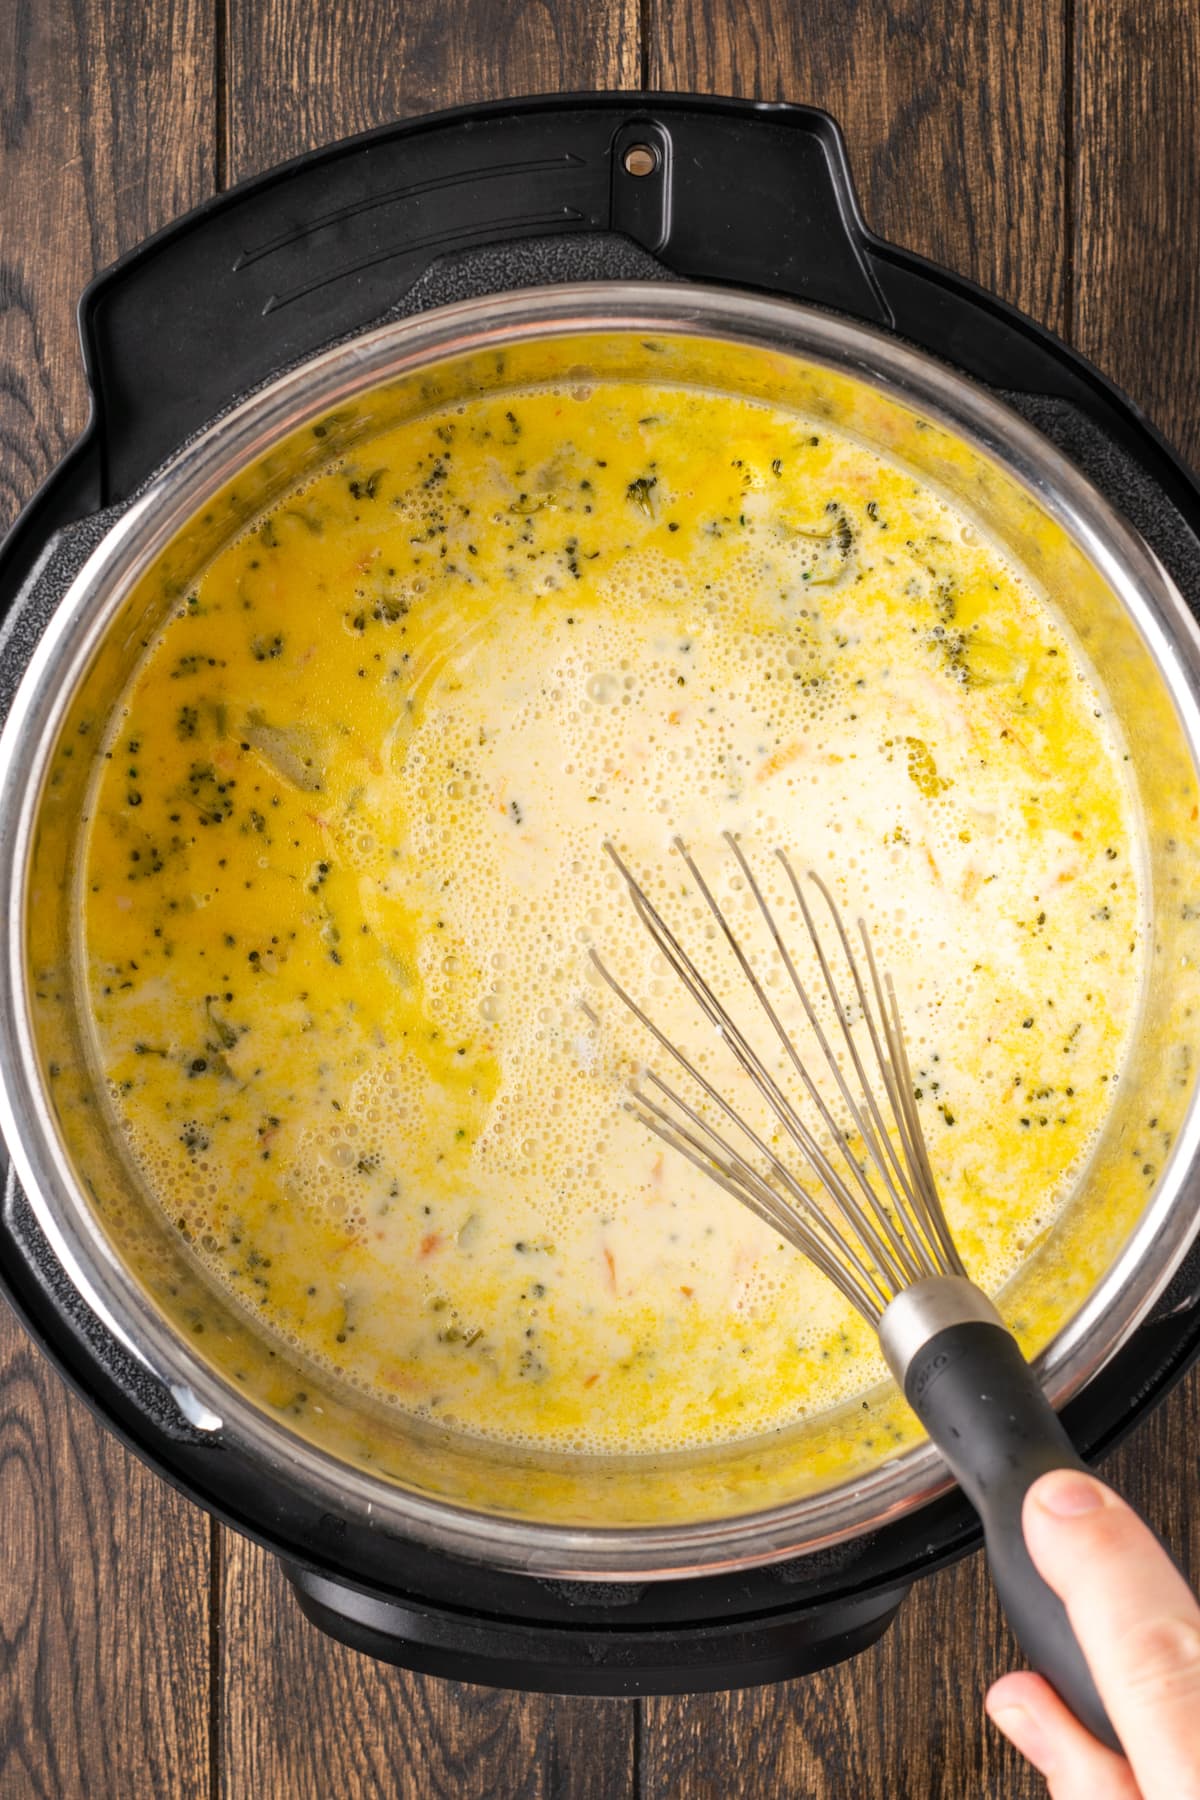 A whisk is used to stir broccoli cheddar soup inside the instant pot.